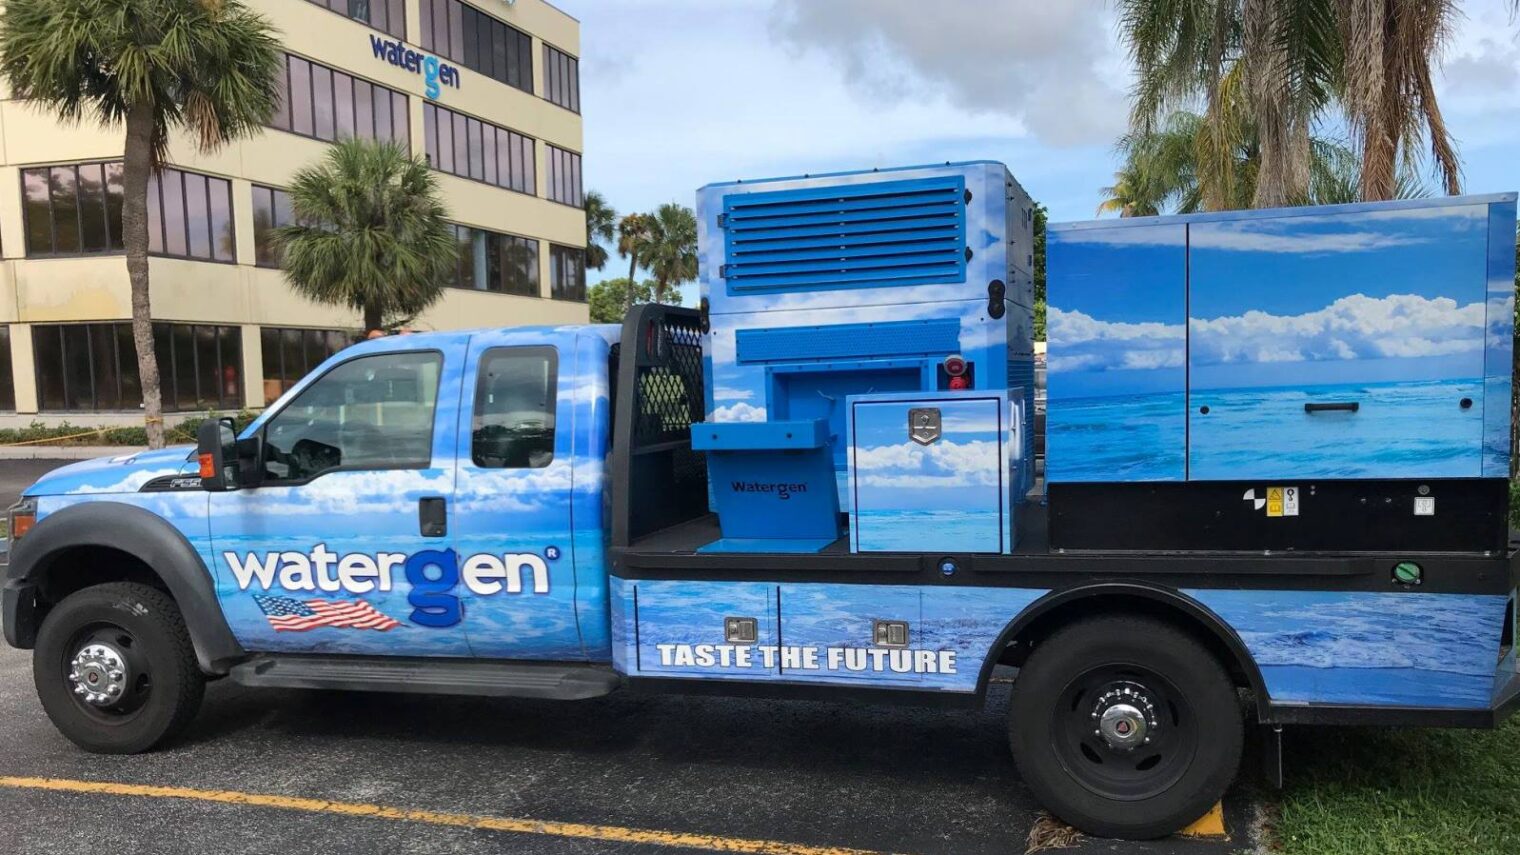 Watergen USA built an emergency response vehicle to take GEN-350 atmospheric water generators to disaster zones to provide drinking water from air. Photo: courtesy